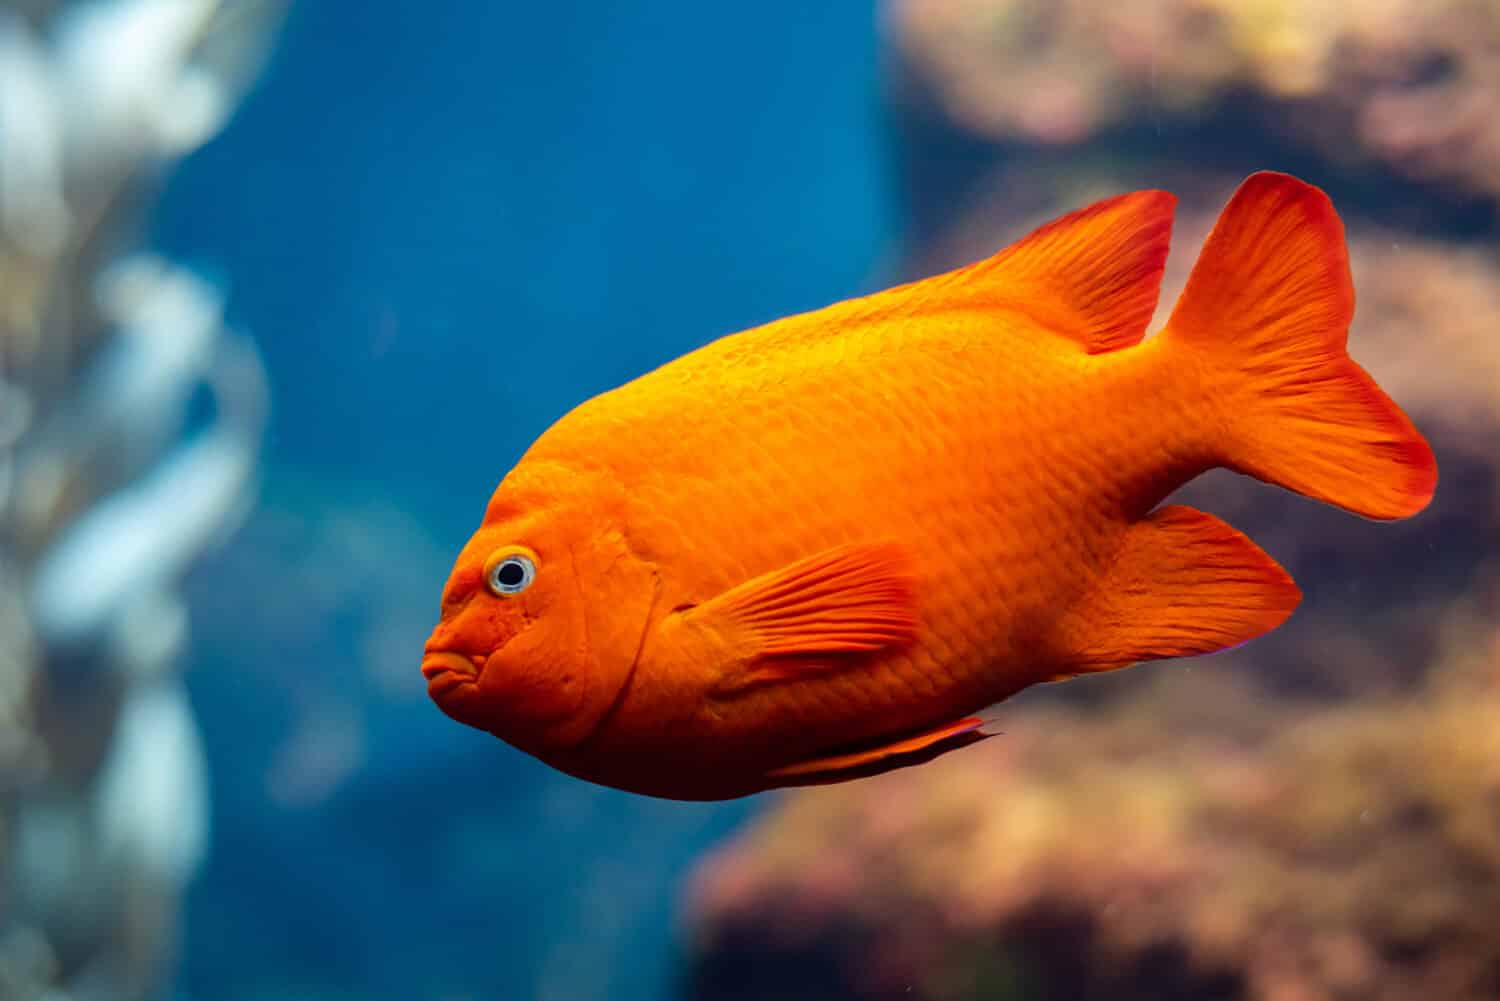 Garibaldi fish (Hypsypops rubicundus), a bright orange type of damselfish, are the official marine fish of California and are protected in the local waters. The are numerous on Santa Catalina Island.